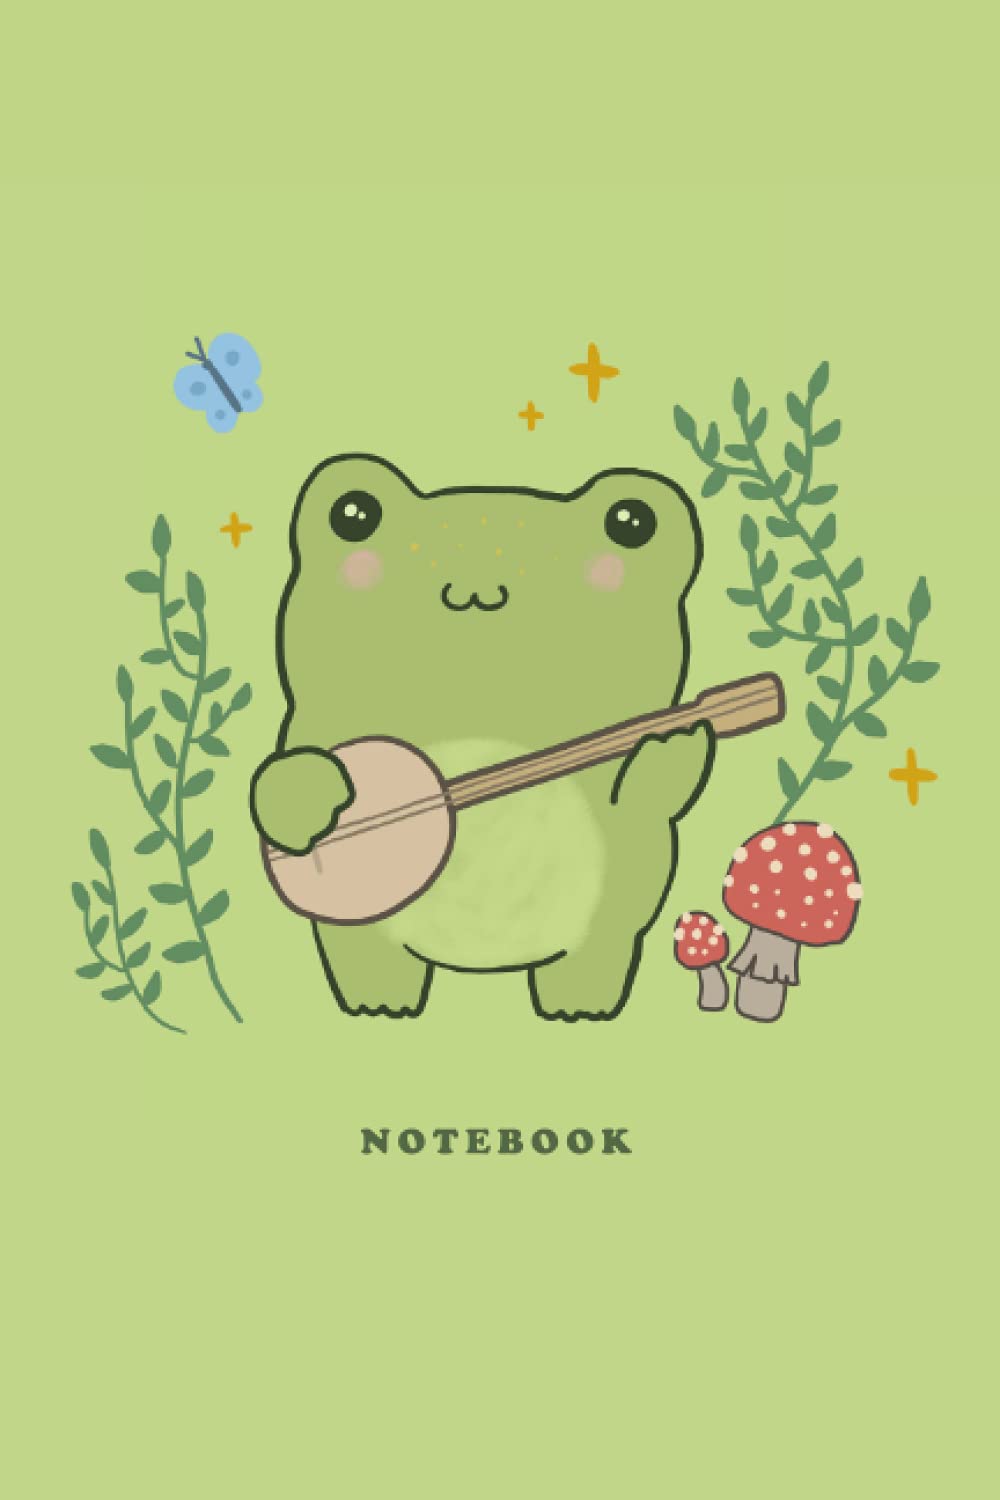 A frog playing the guitar on green background - Frog